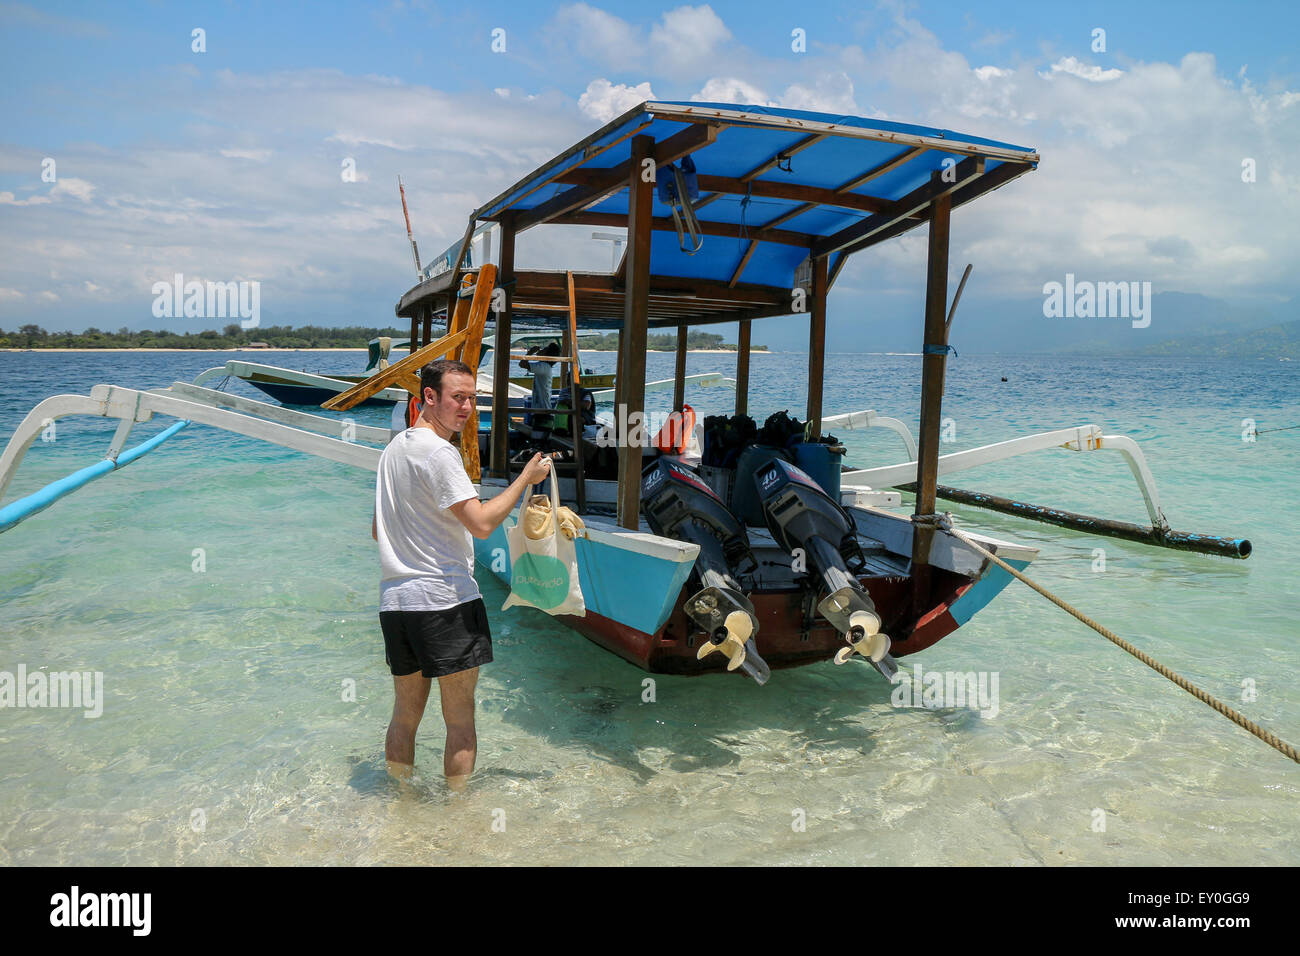 Young adullt men wearing white shirt and black shorts carrying a bag with clothes standing by the dive boat parked by the shore Stock Photo